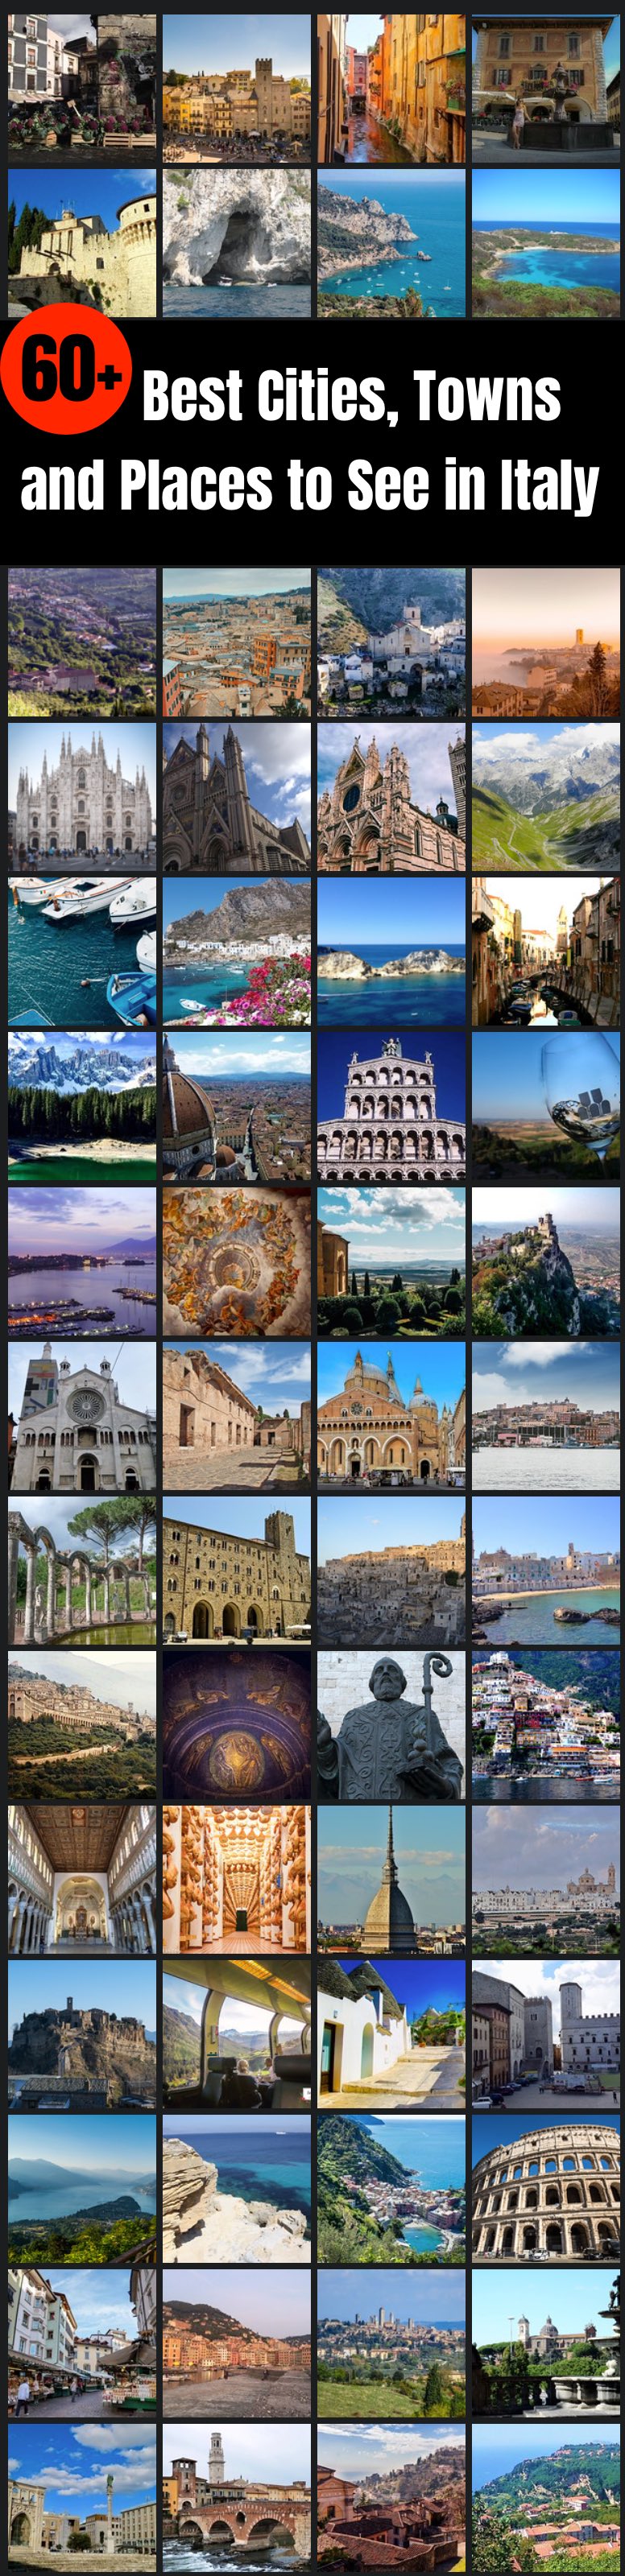 60+ Best Cities, Towns and Places to See in Italy